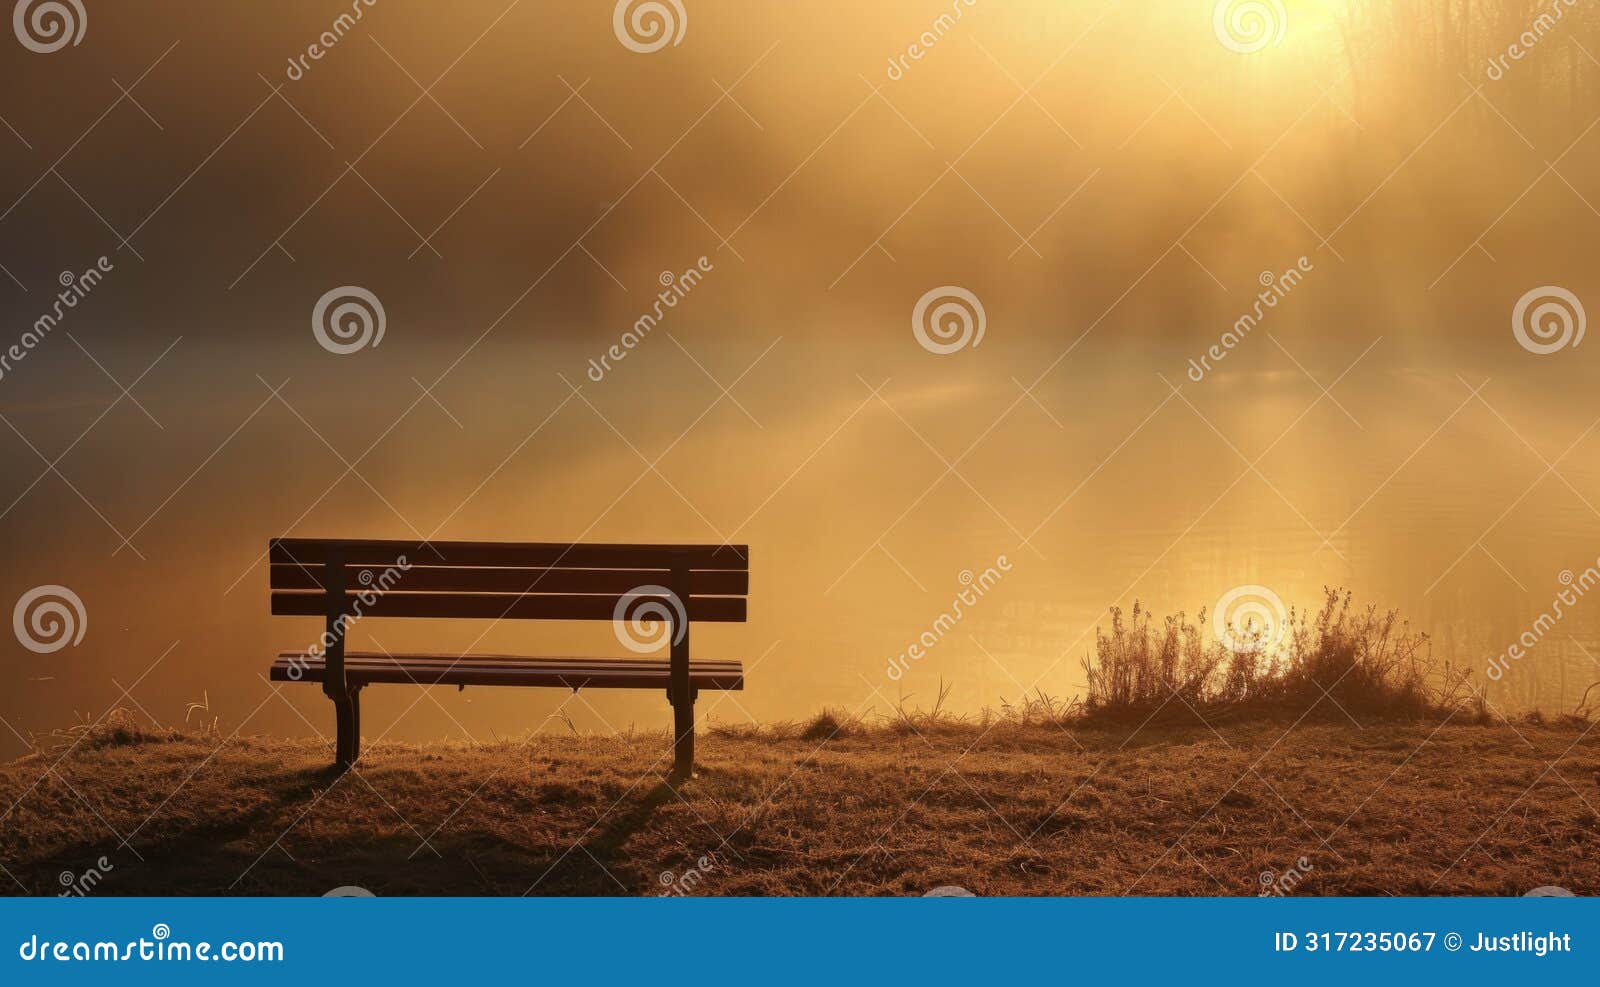 a lone park bench sits in the midst of the backlit fog creating a serene and peaceful scene